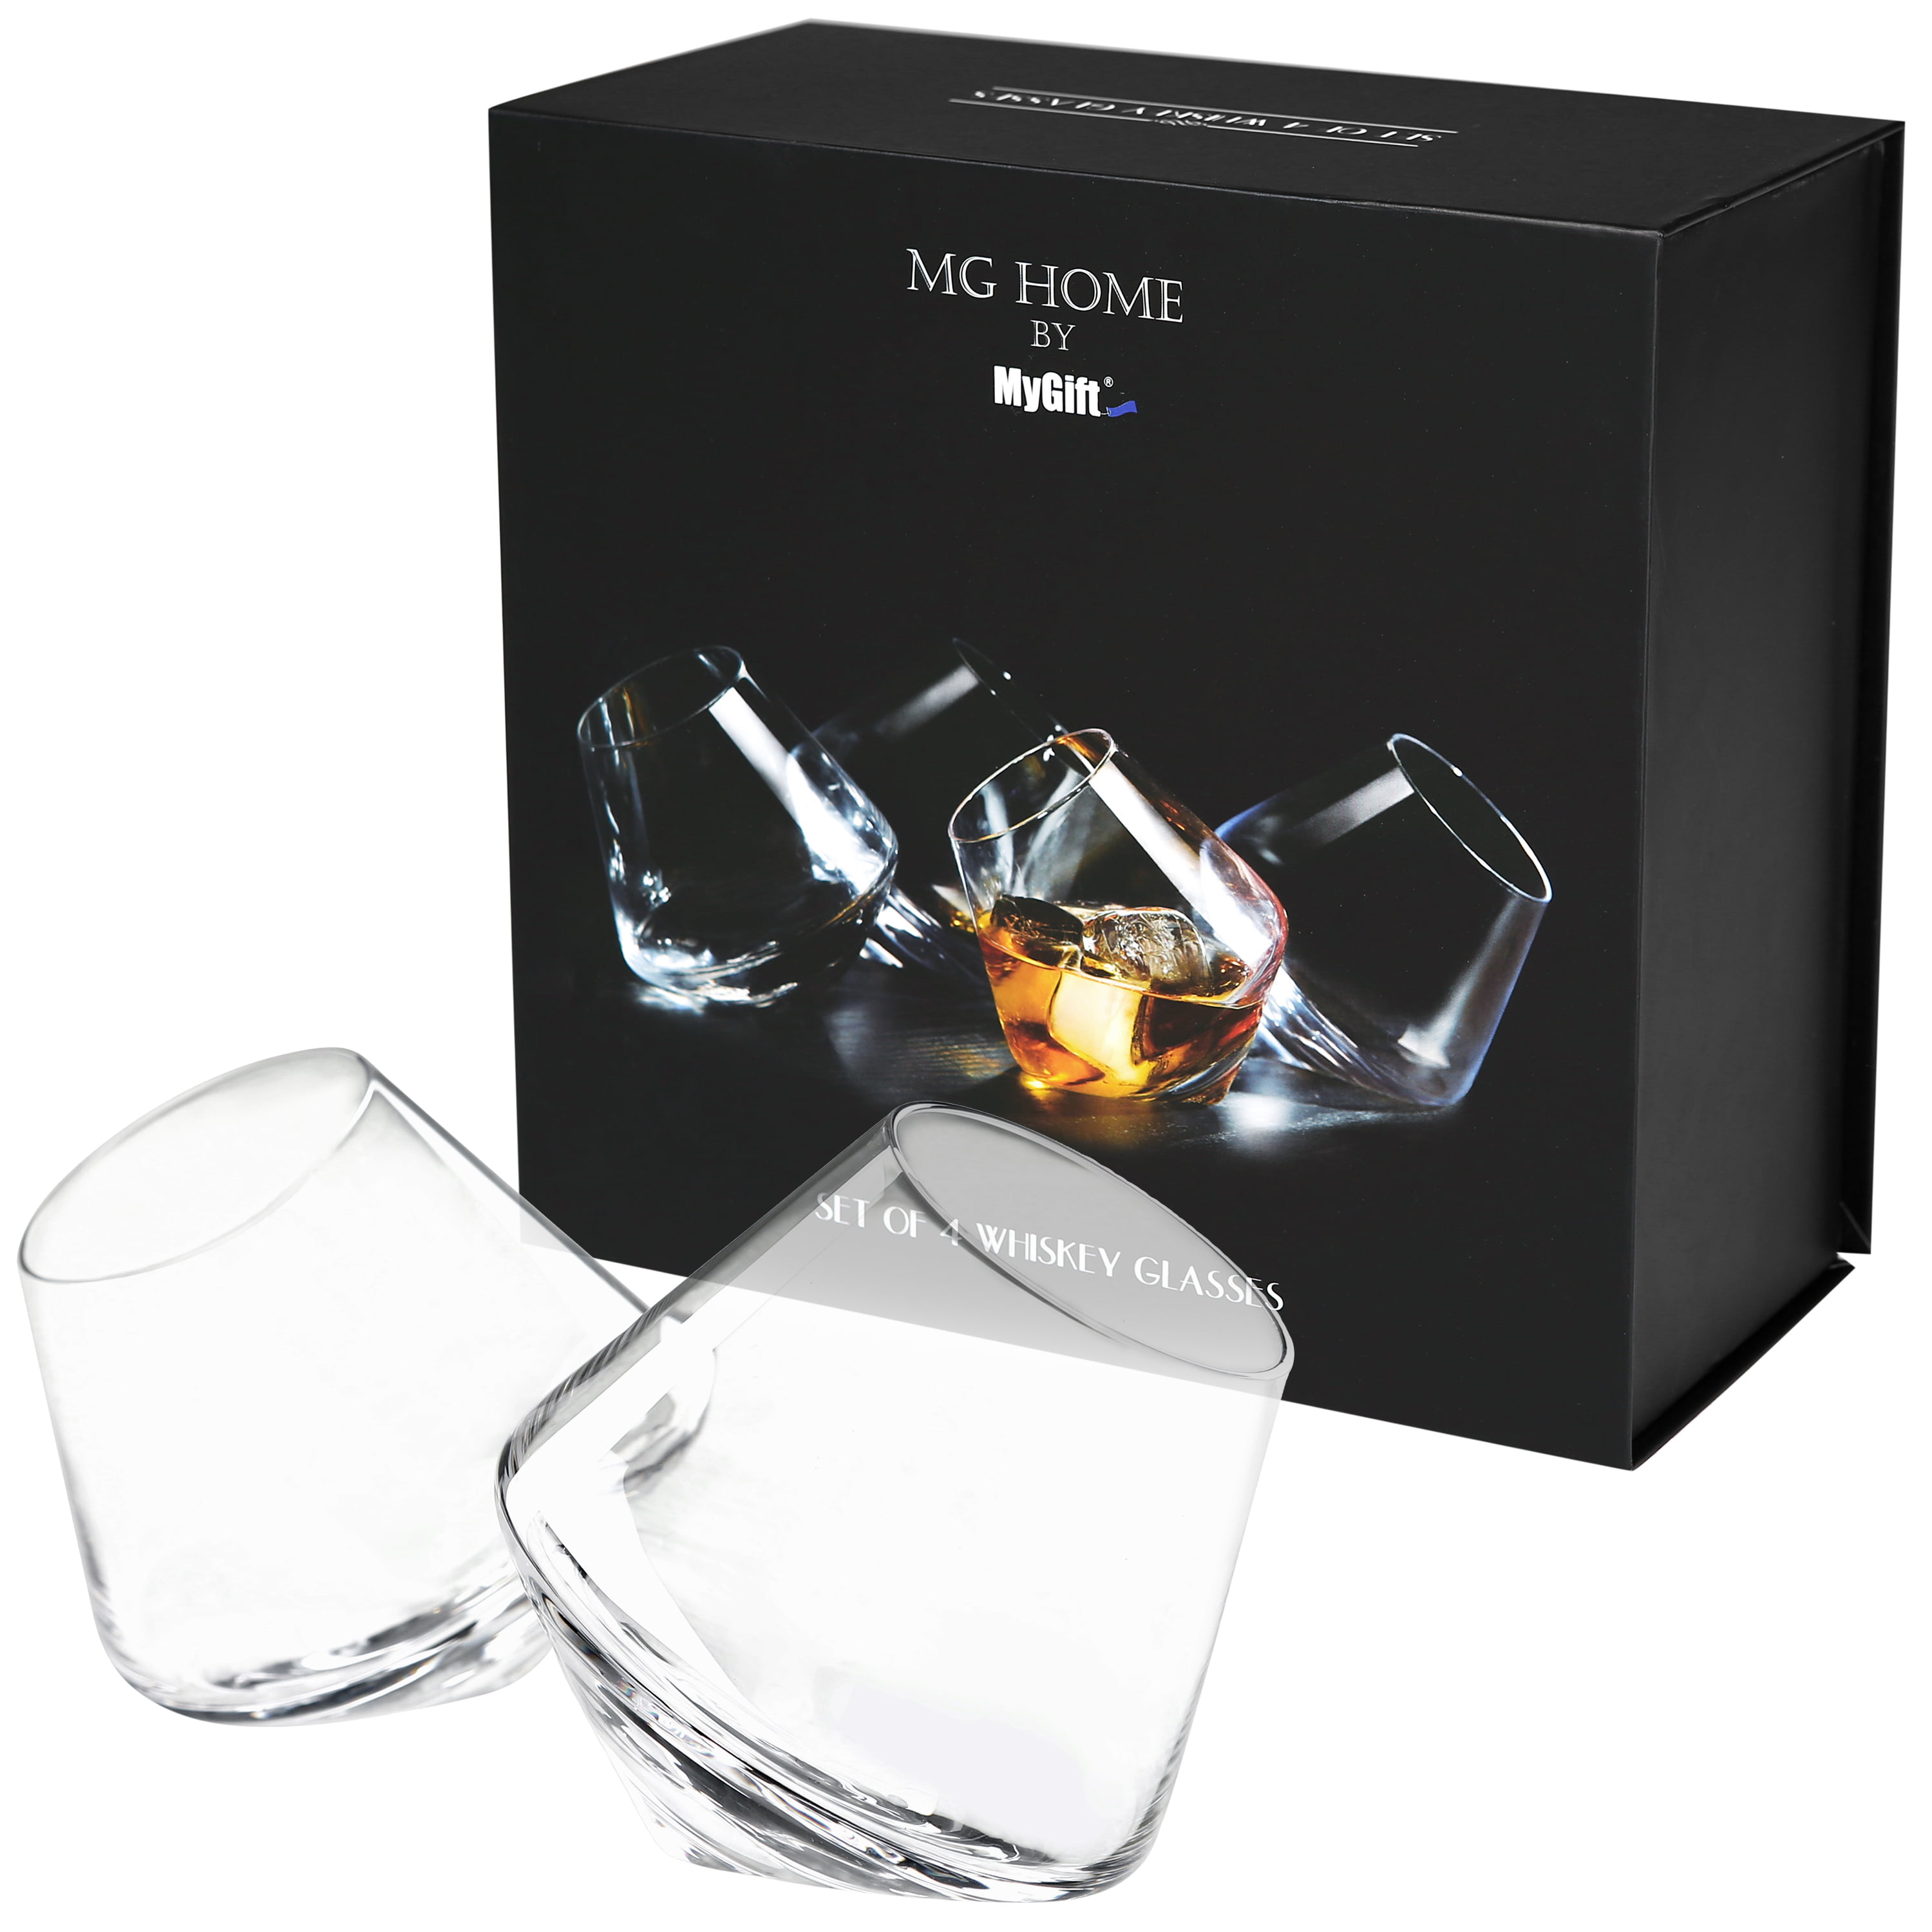 Waterford Crystal Whiskey Glasses- Great Teacher's Gift